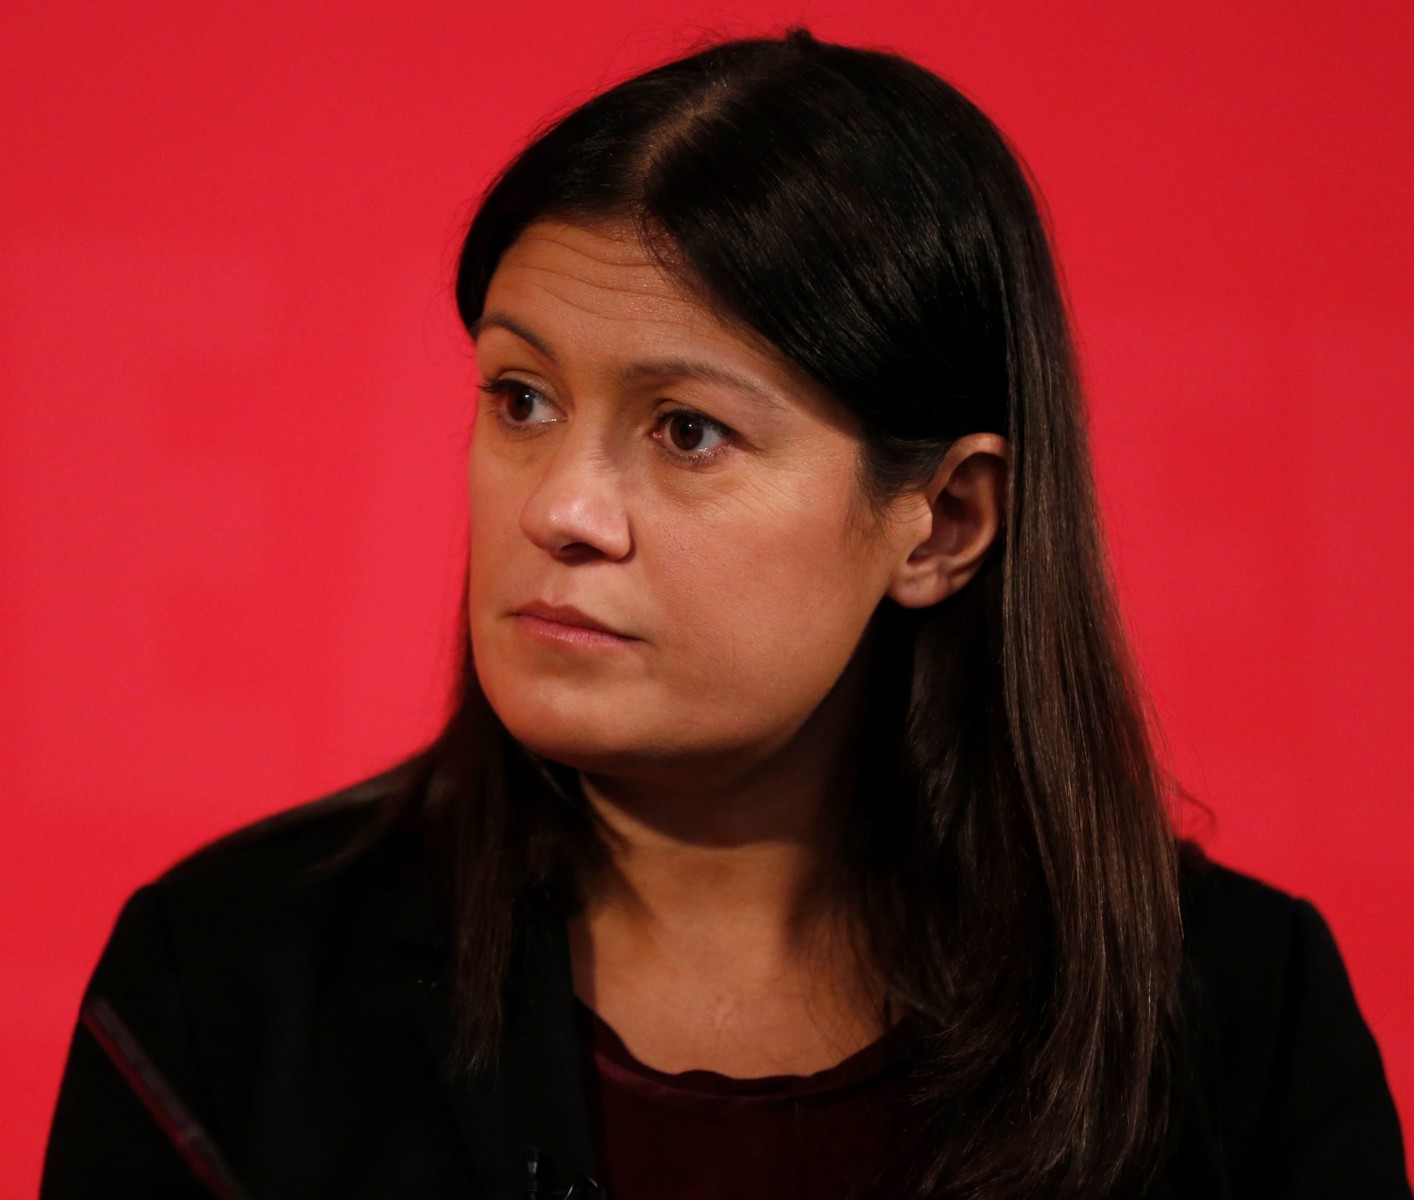 Whilst Lisa Nandy is in third place with 16% of the vote  according to a YouGov poll of Labour members